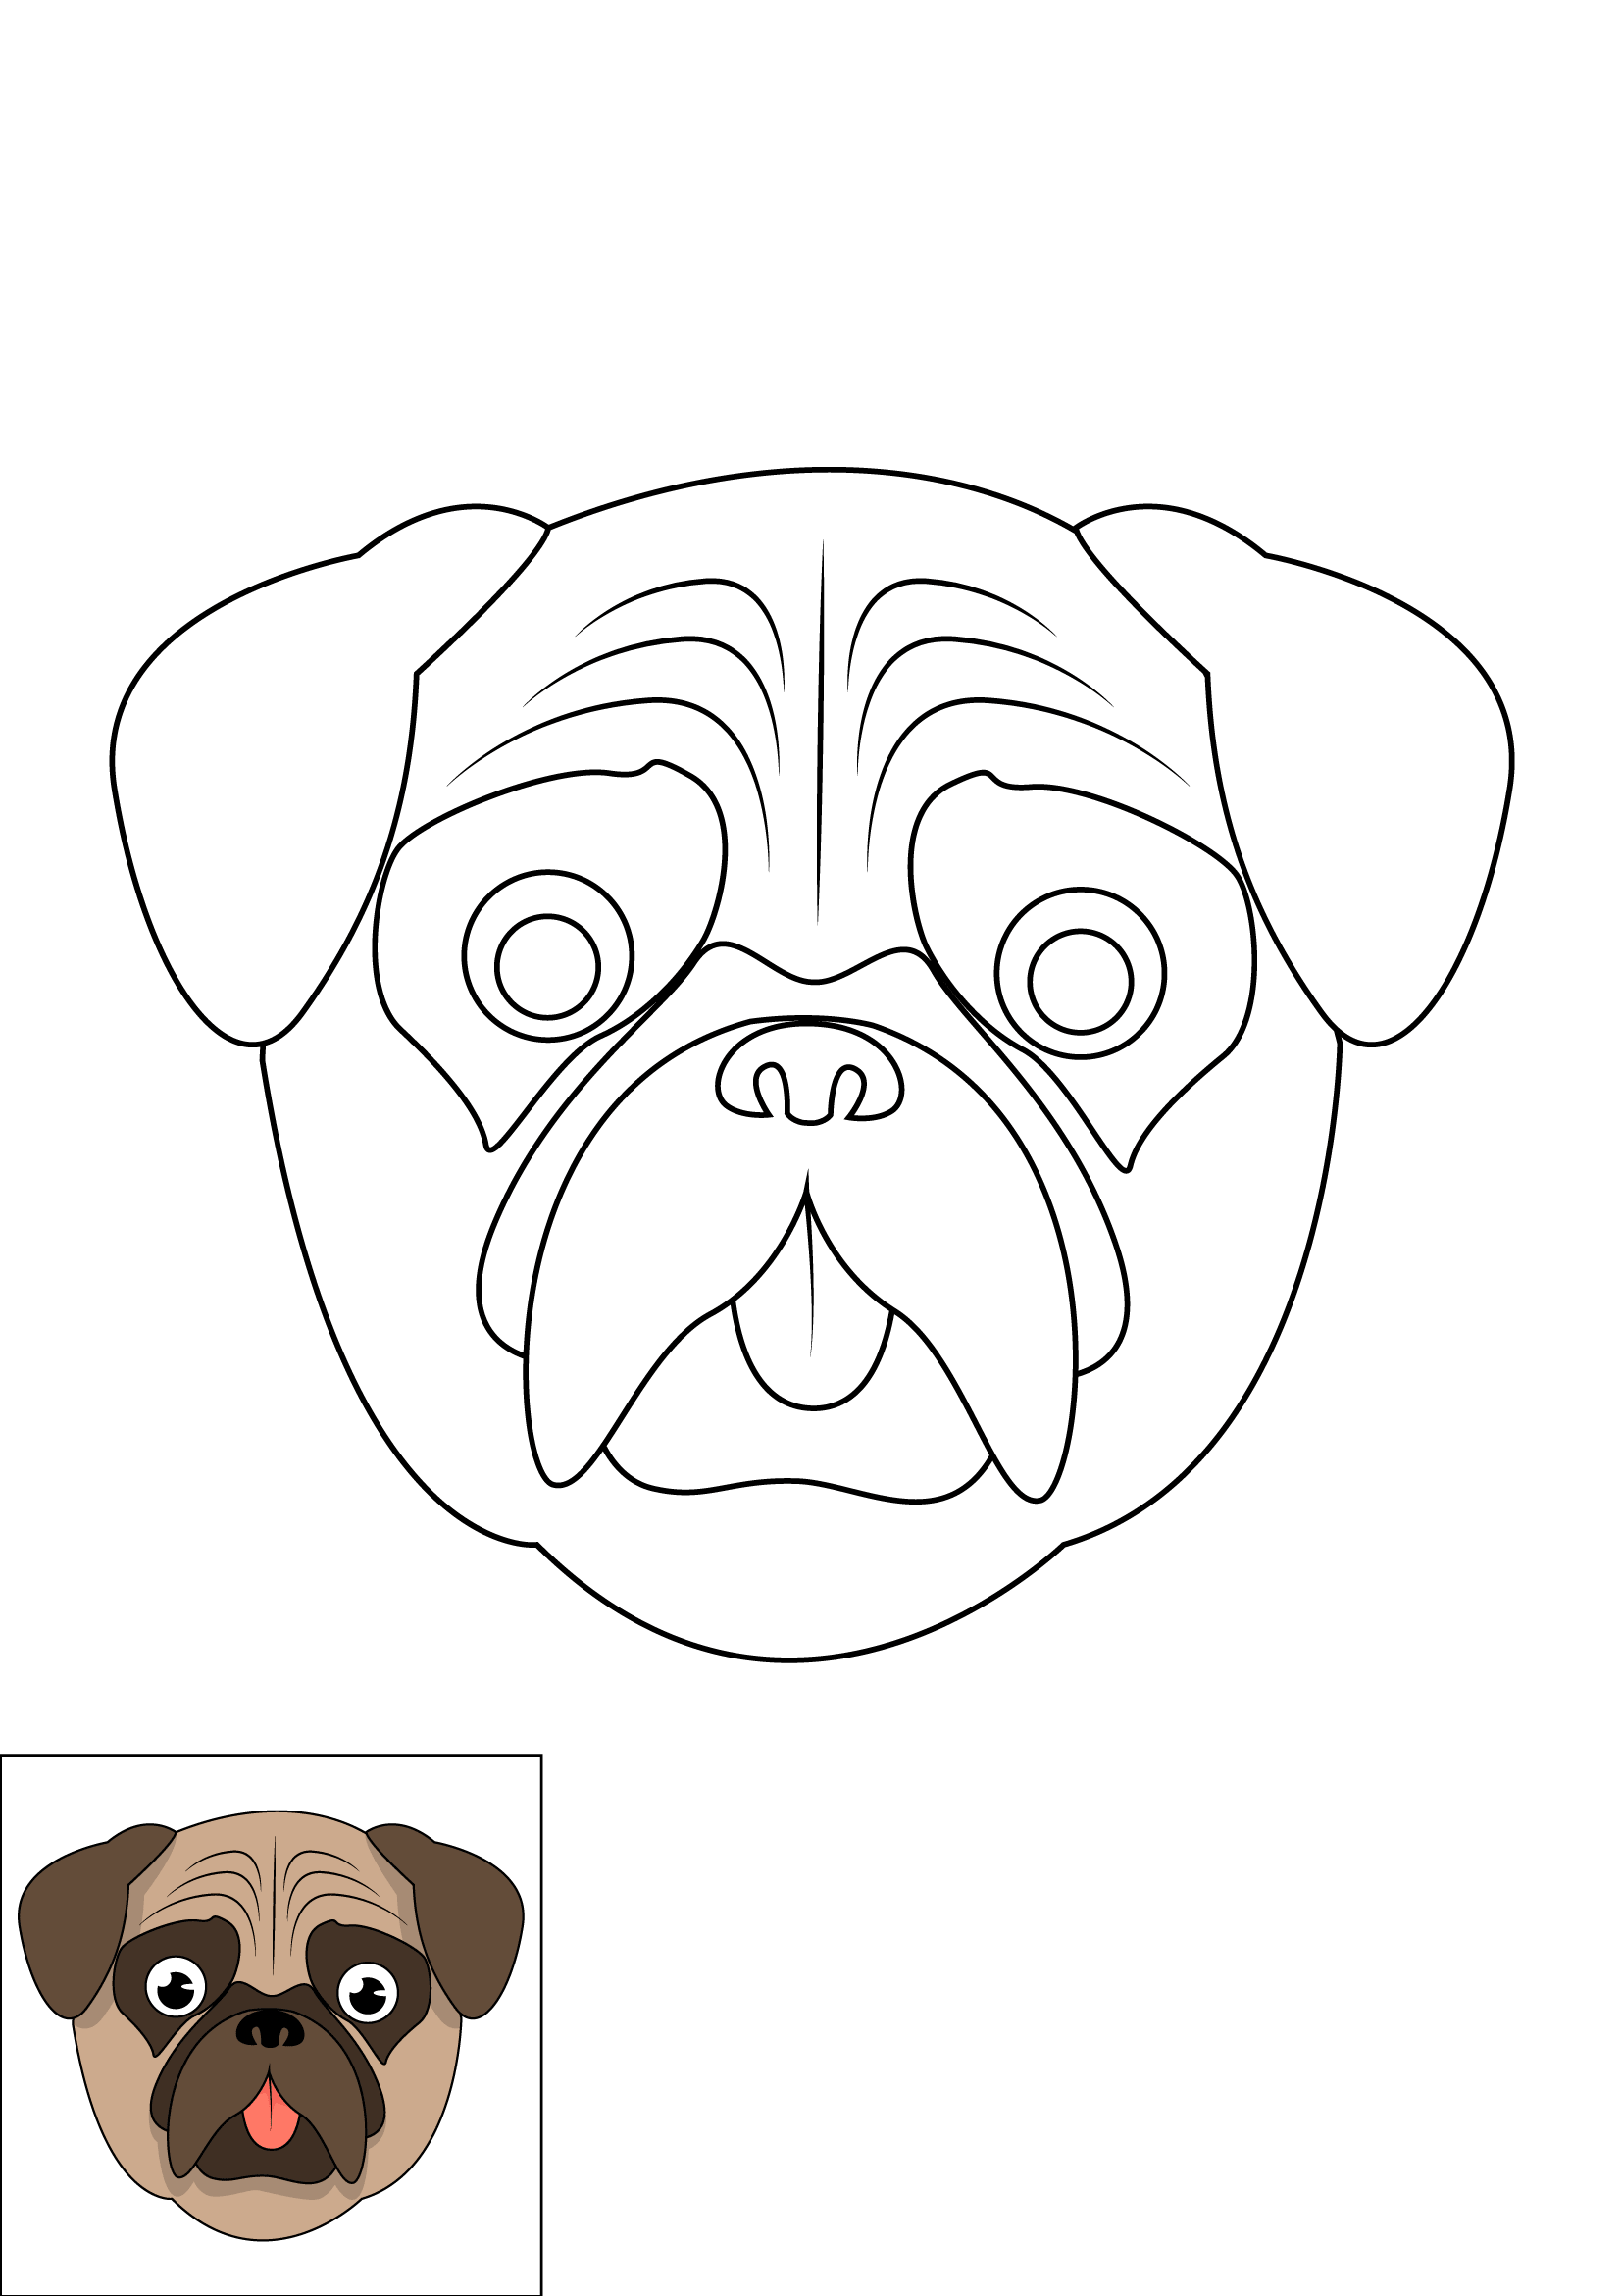 How to Draw A Pug Face Step by Step Printable Color